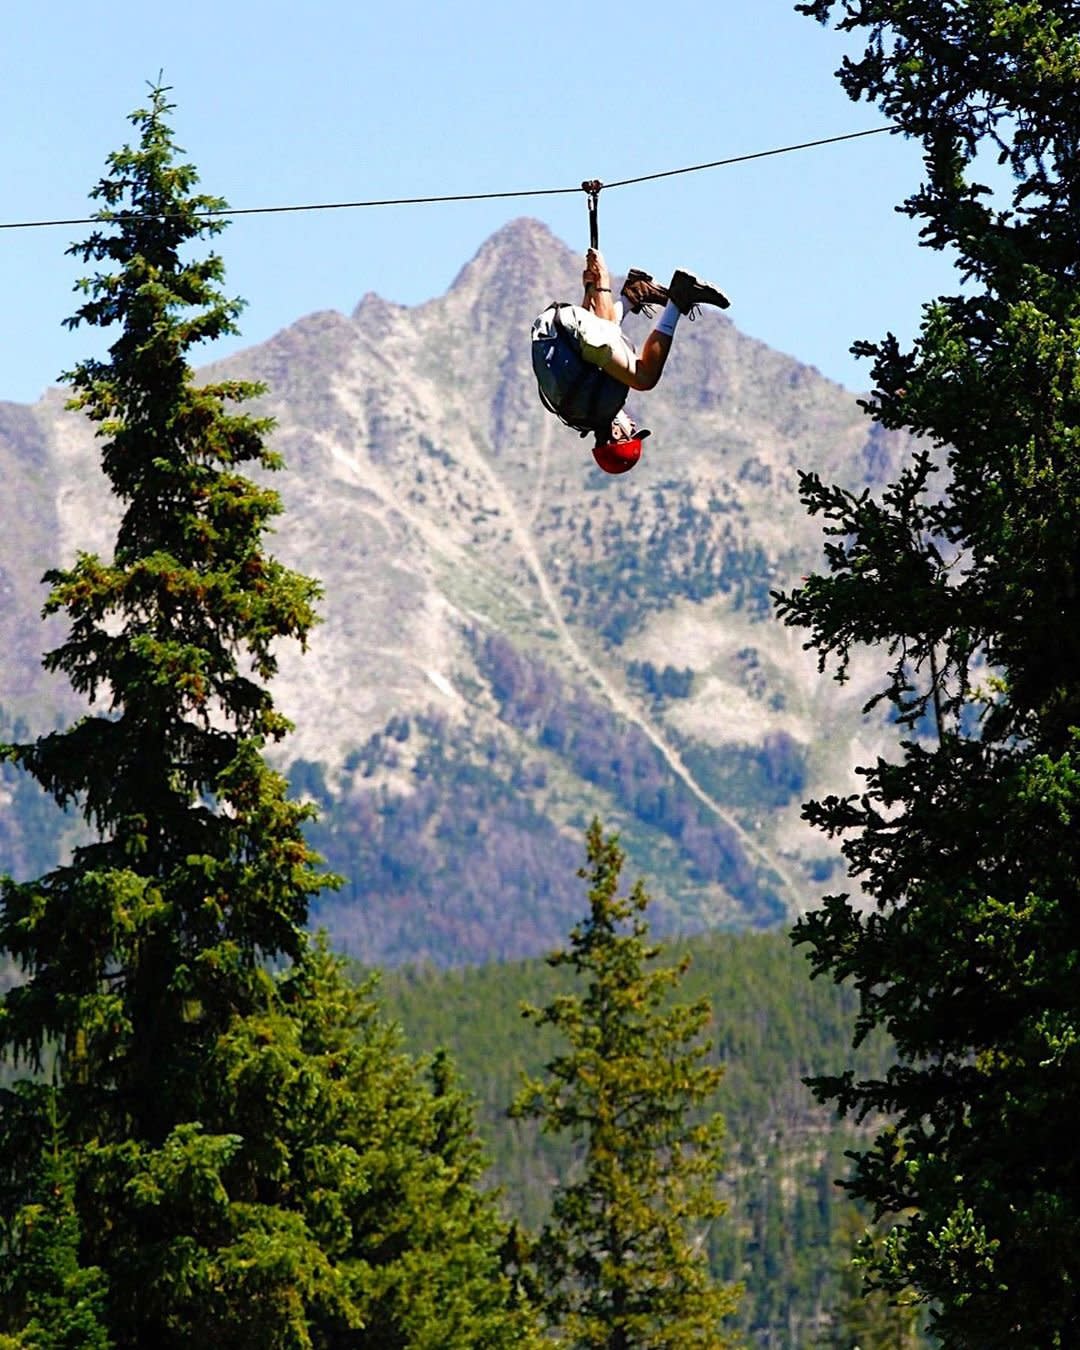 Photo by user whyitsmesky, caption reads Spider-Man tryouts 
#bigskymontana #tbt #zipline #bigskyresort #nature #outdoors